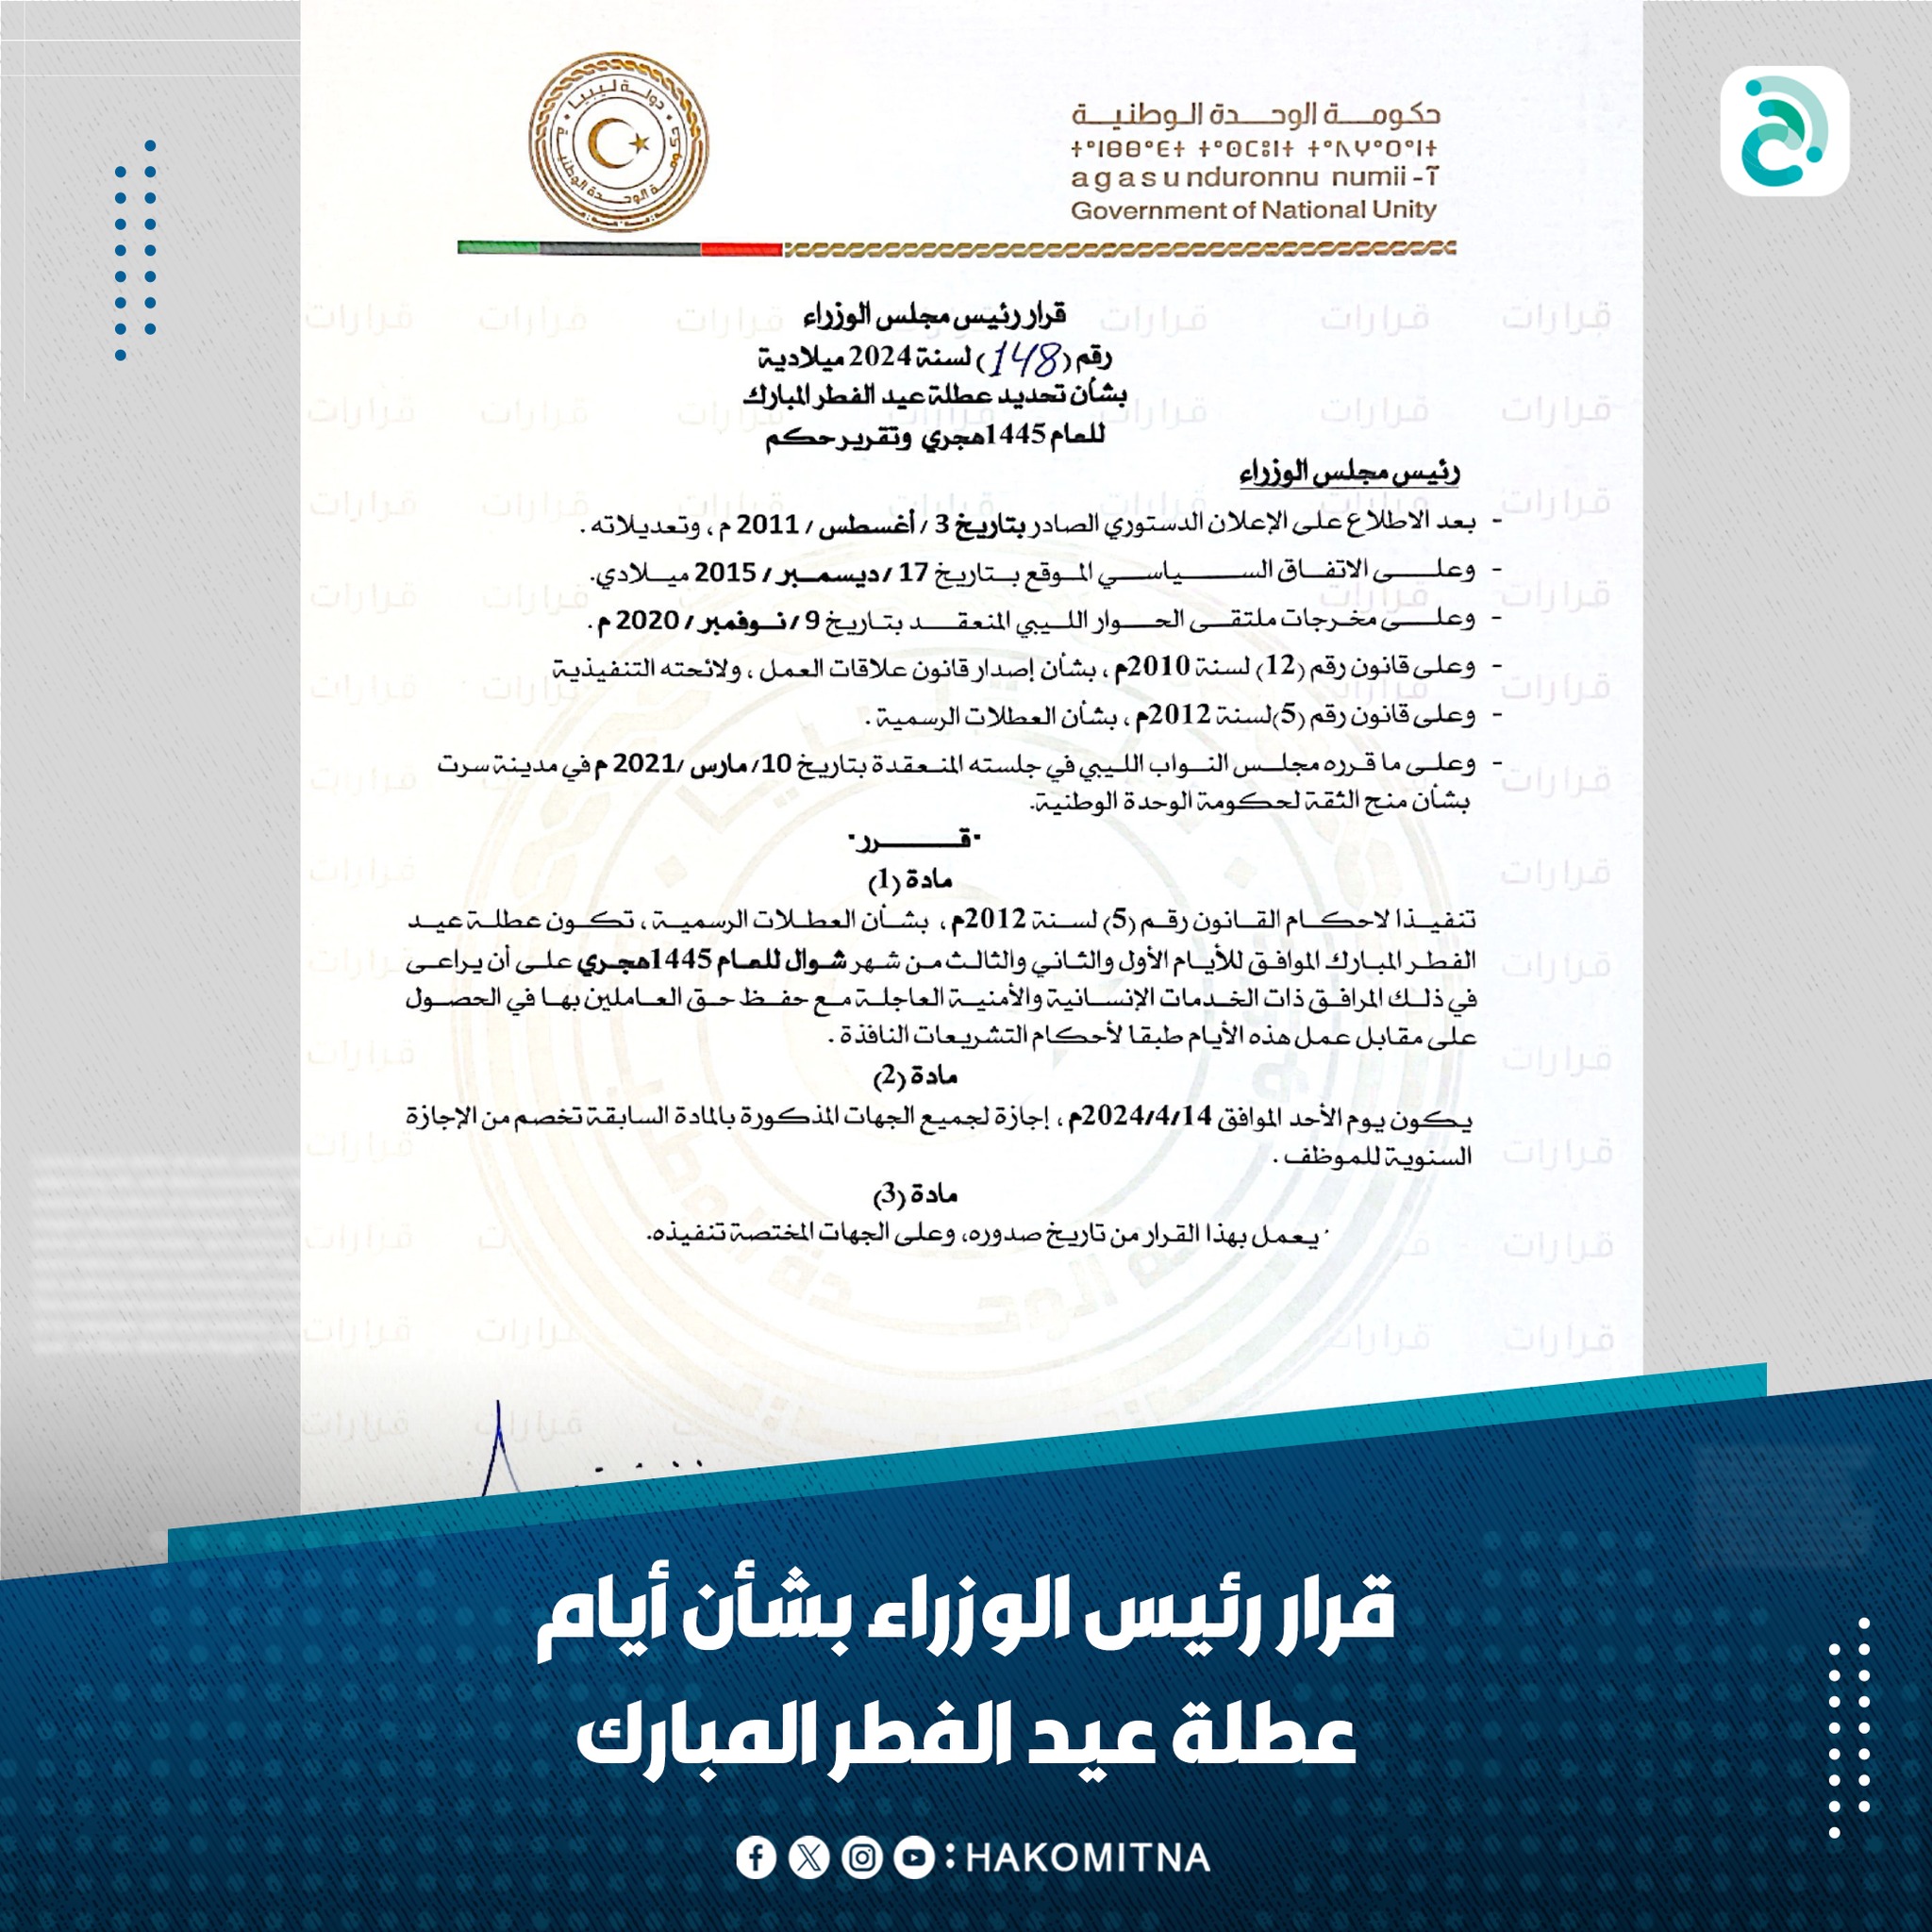 The National Unity Government sets the days of Eid al-Fitr as an official holiday and grants Sunday an official holiday.